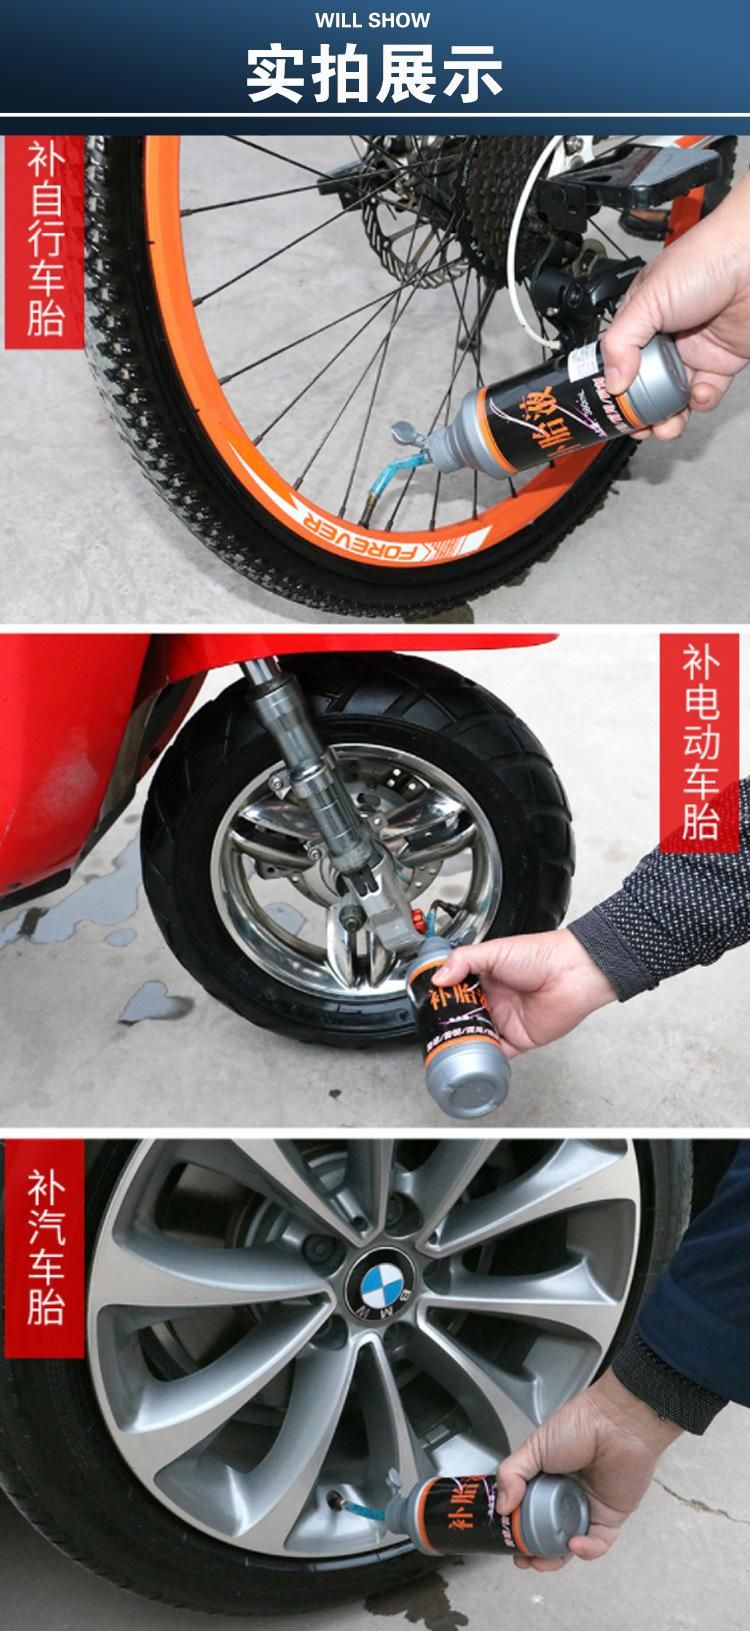 Cheap Motorcycle/Bicycle/Car Tyre Fix Puncture Repair, Luquid Tyre Sealant